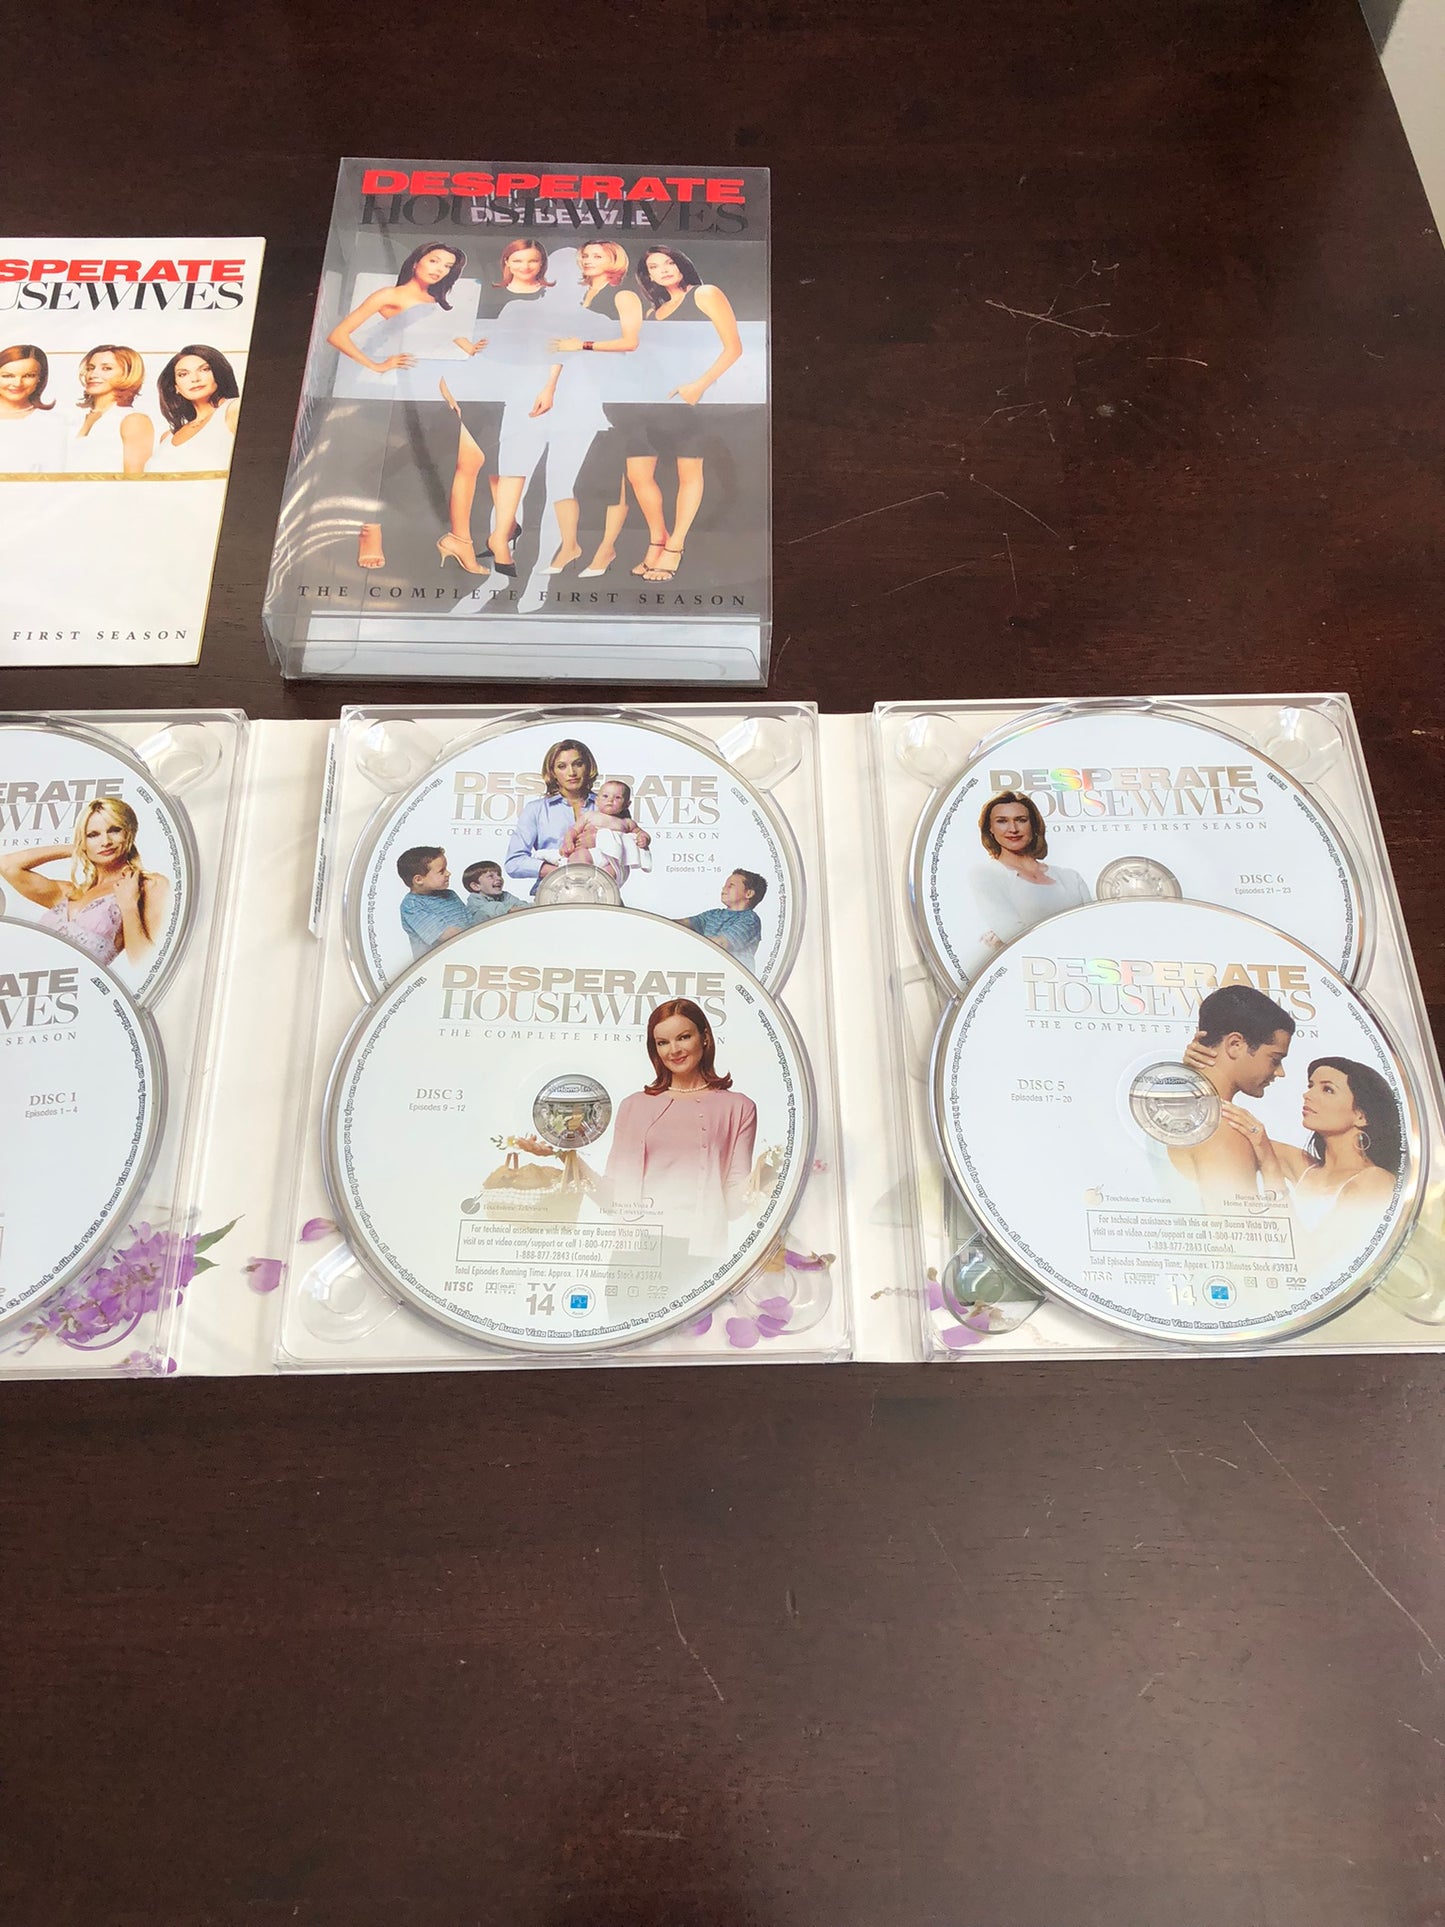 Desperate Housewives Complete Season One DVD - 6 Disc Set	TV Show / Series - 786936280326